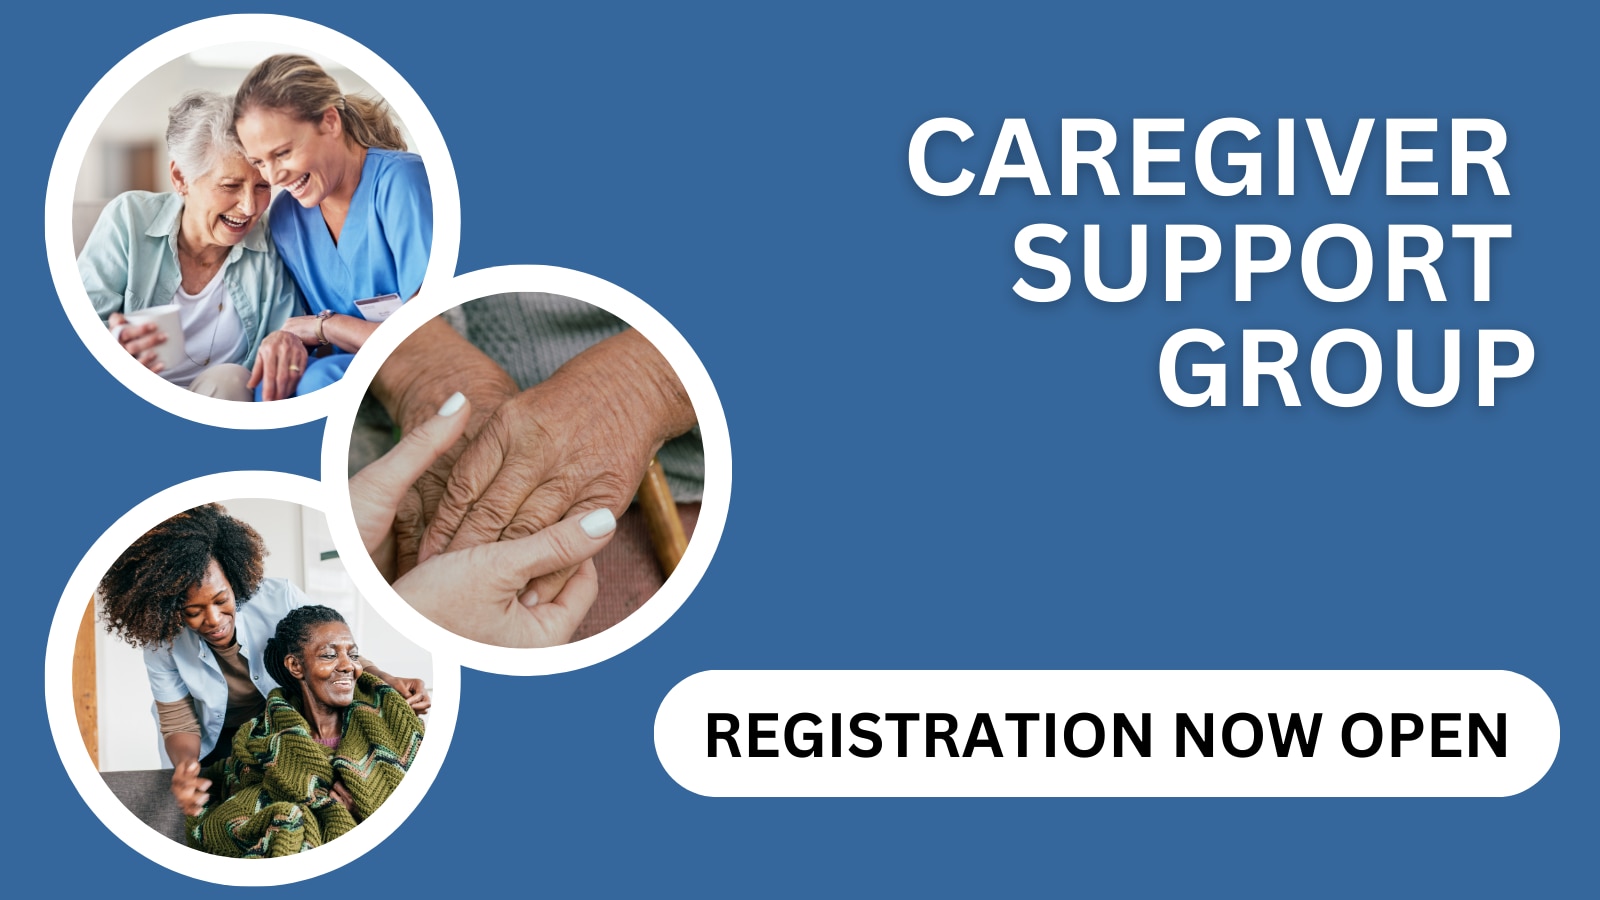 Three photos of caregivers with the text: Caregiver Support Group, Registration Now Open